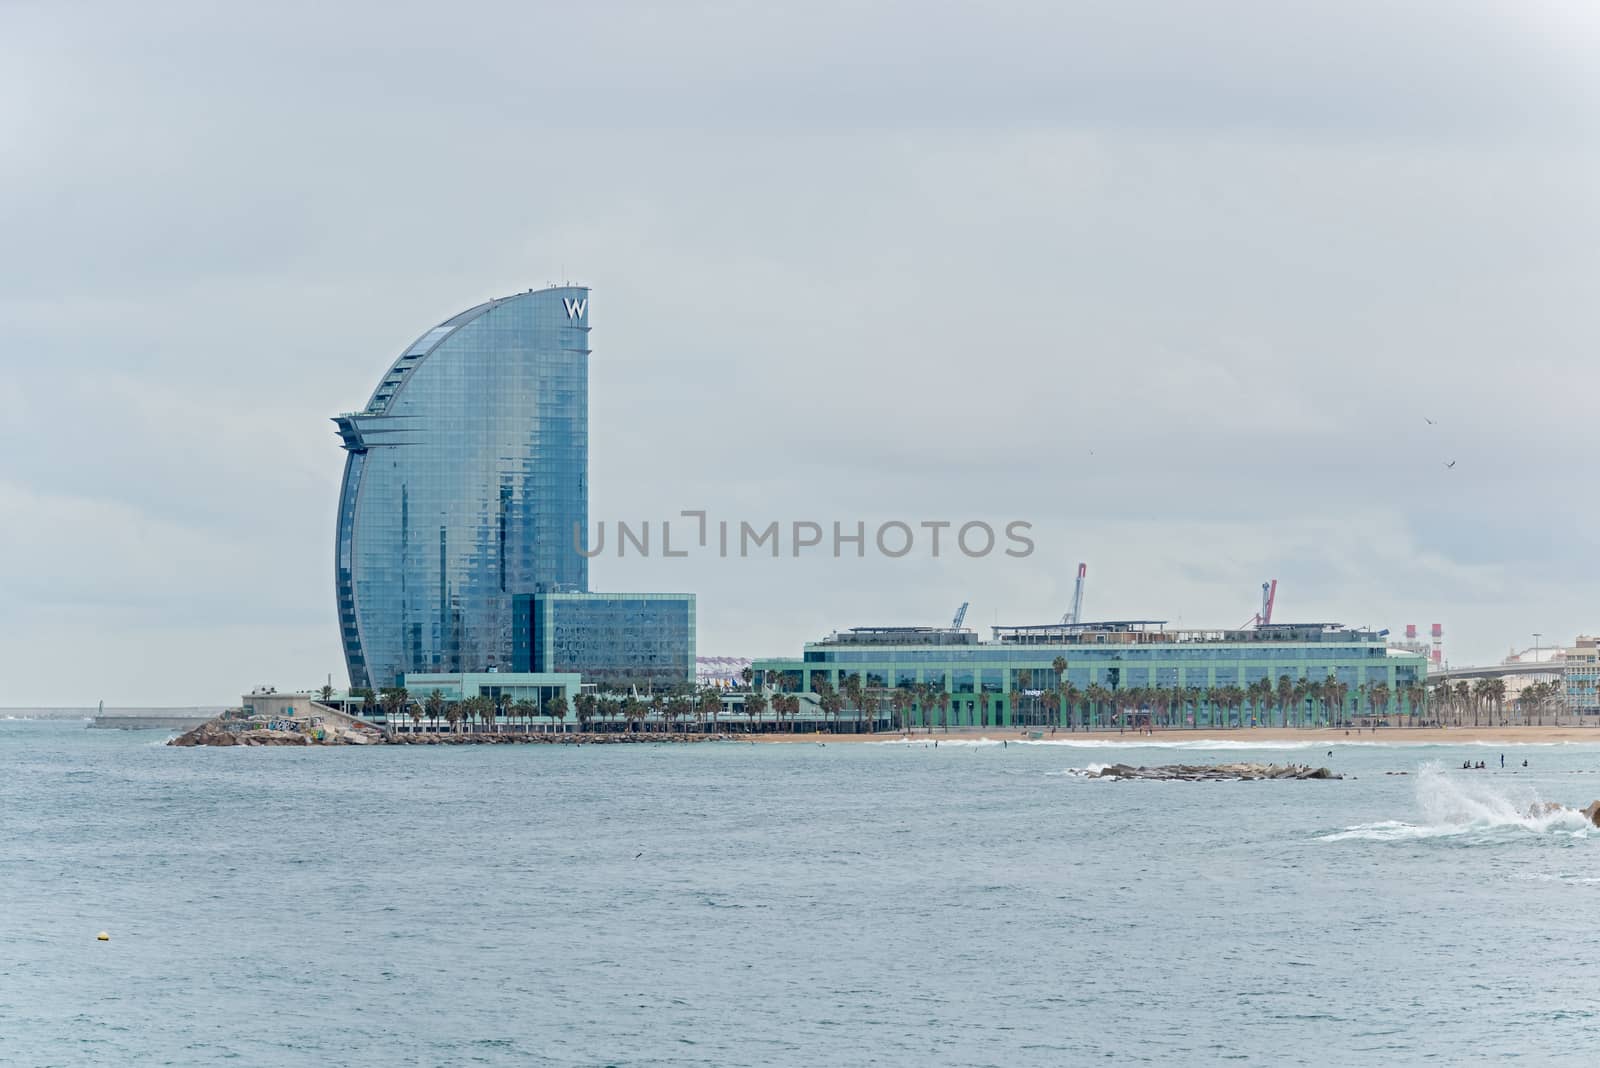 Port Entrance and W Barcelona Hotel by Marcus